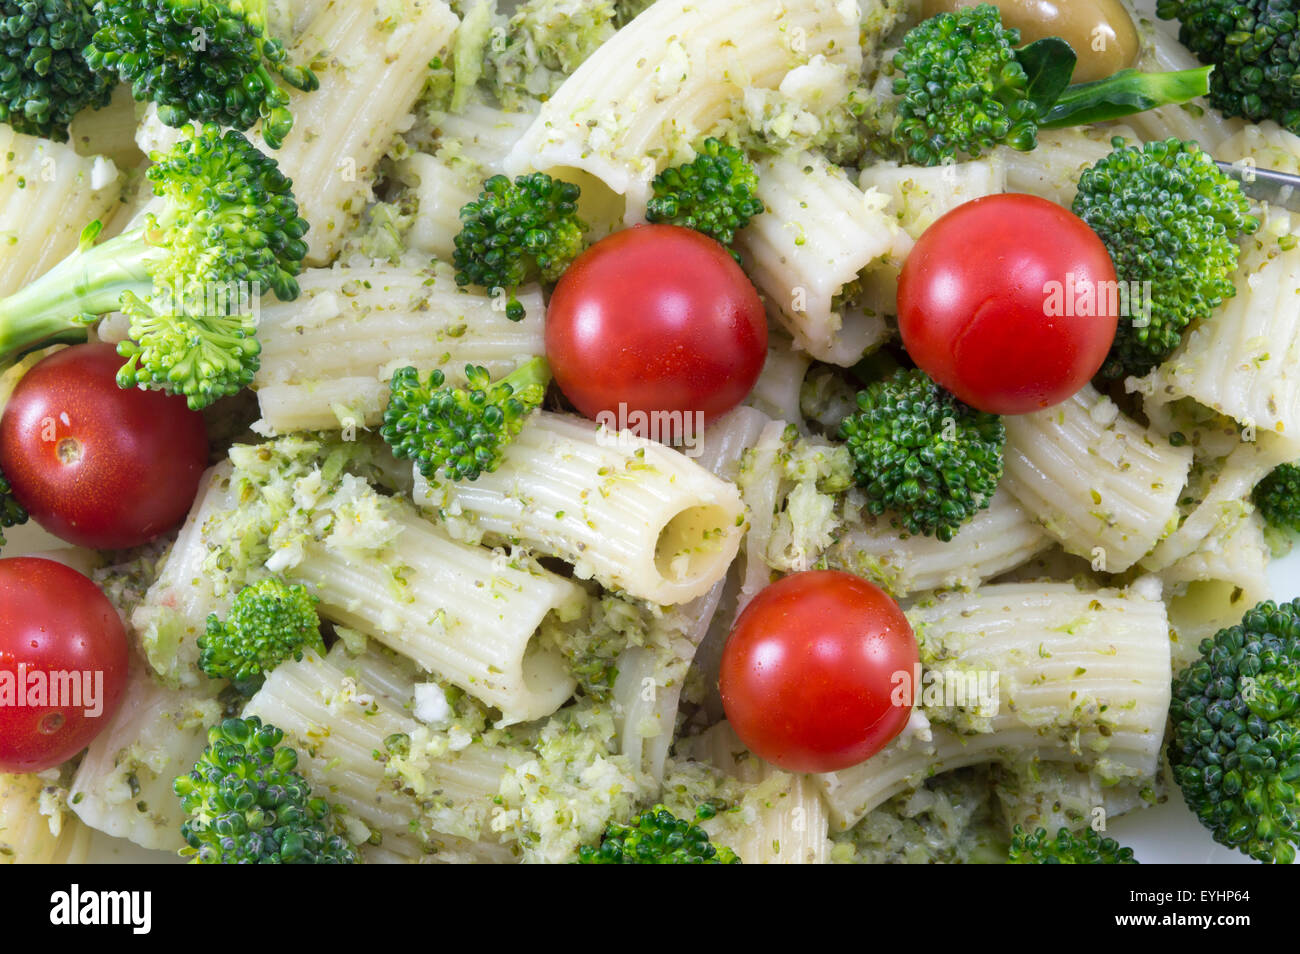 Pasta with broccoli and whole cherry tomatoes served close-up Stock Photo